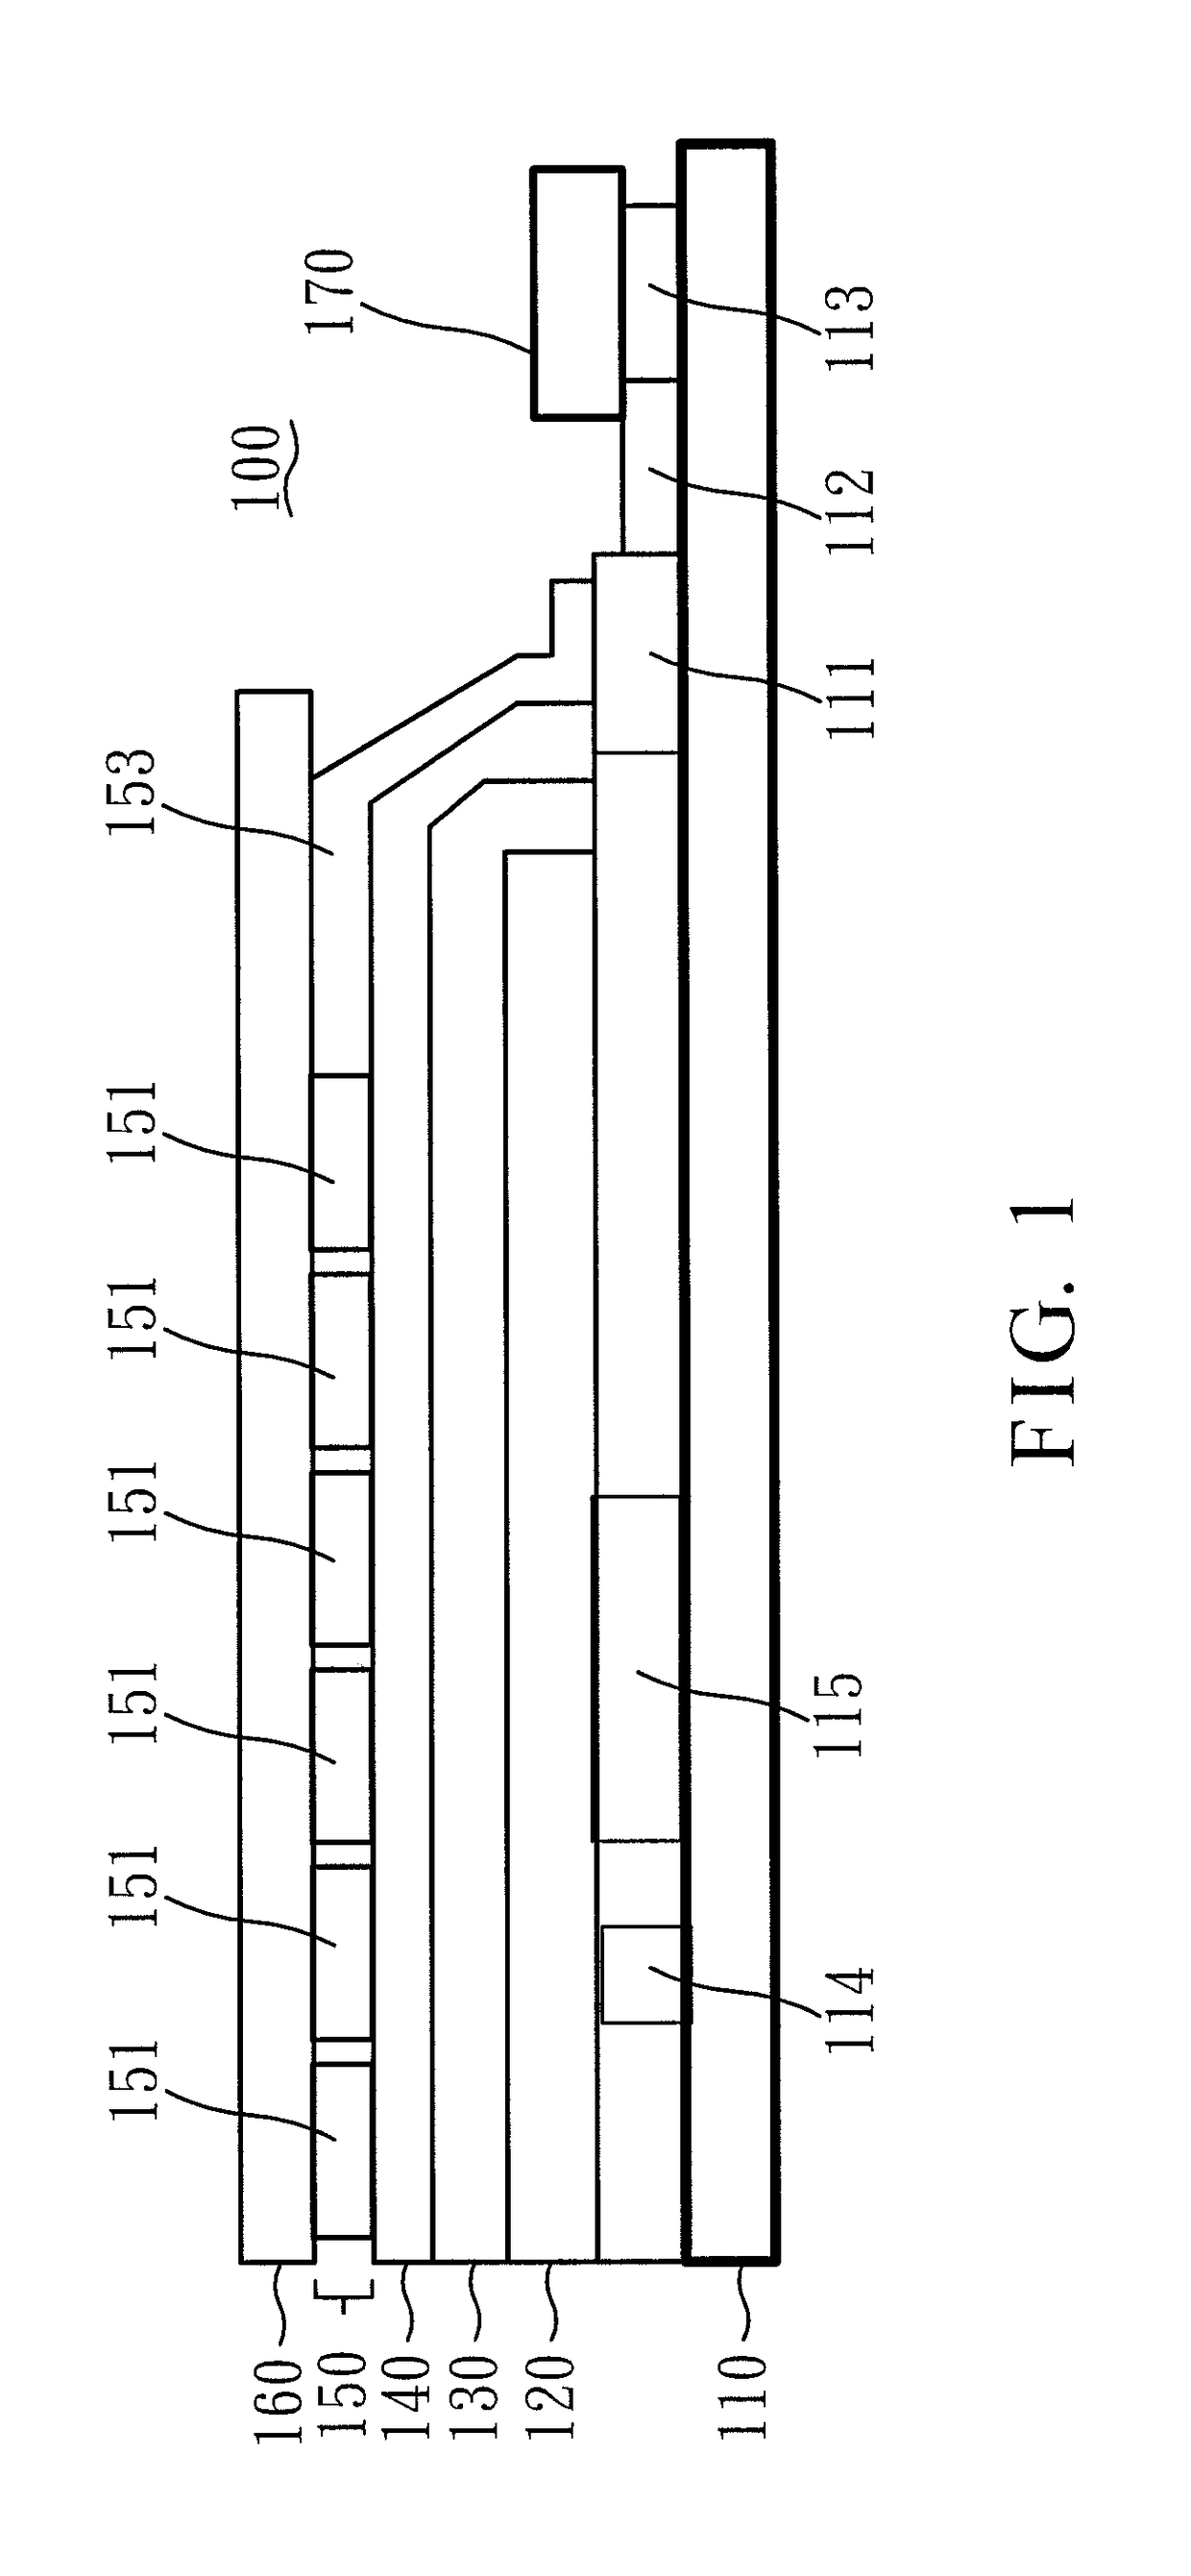 OLED touch display device